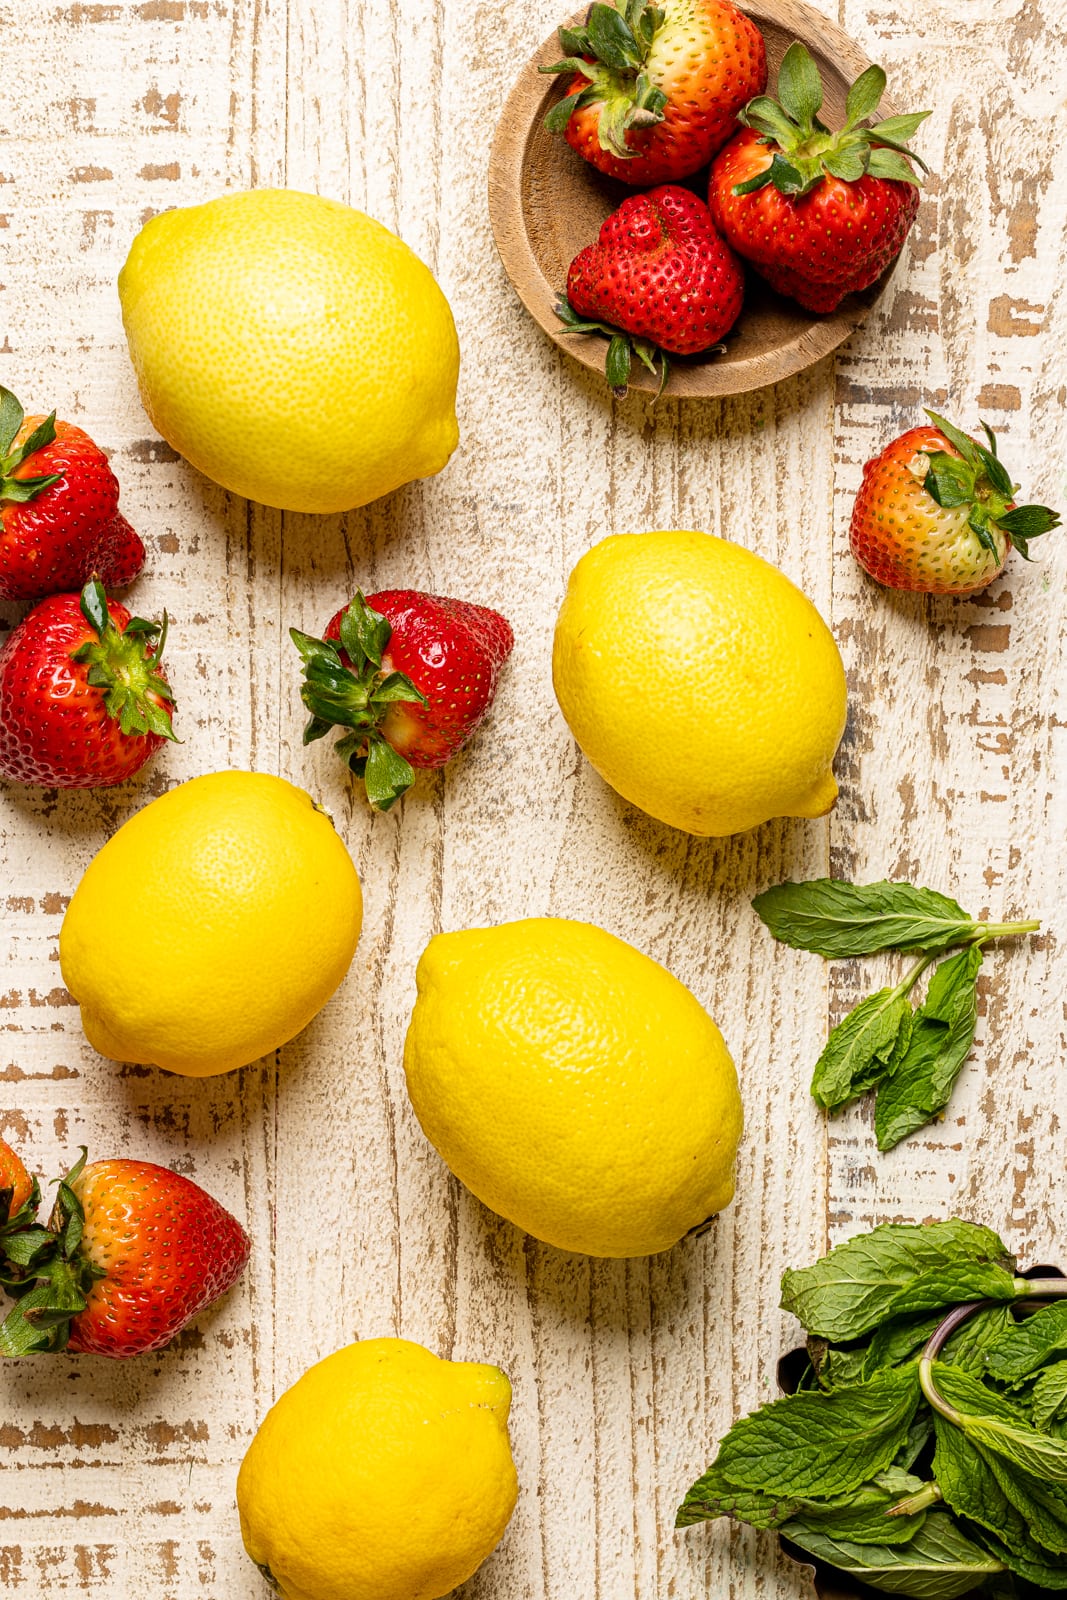 Strawberries and lemons on a white wood table with fresh mint leaves.